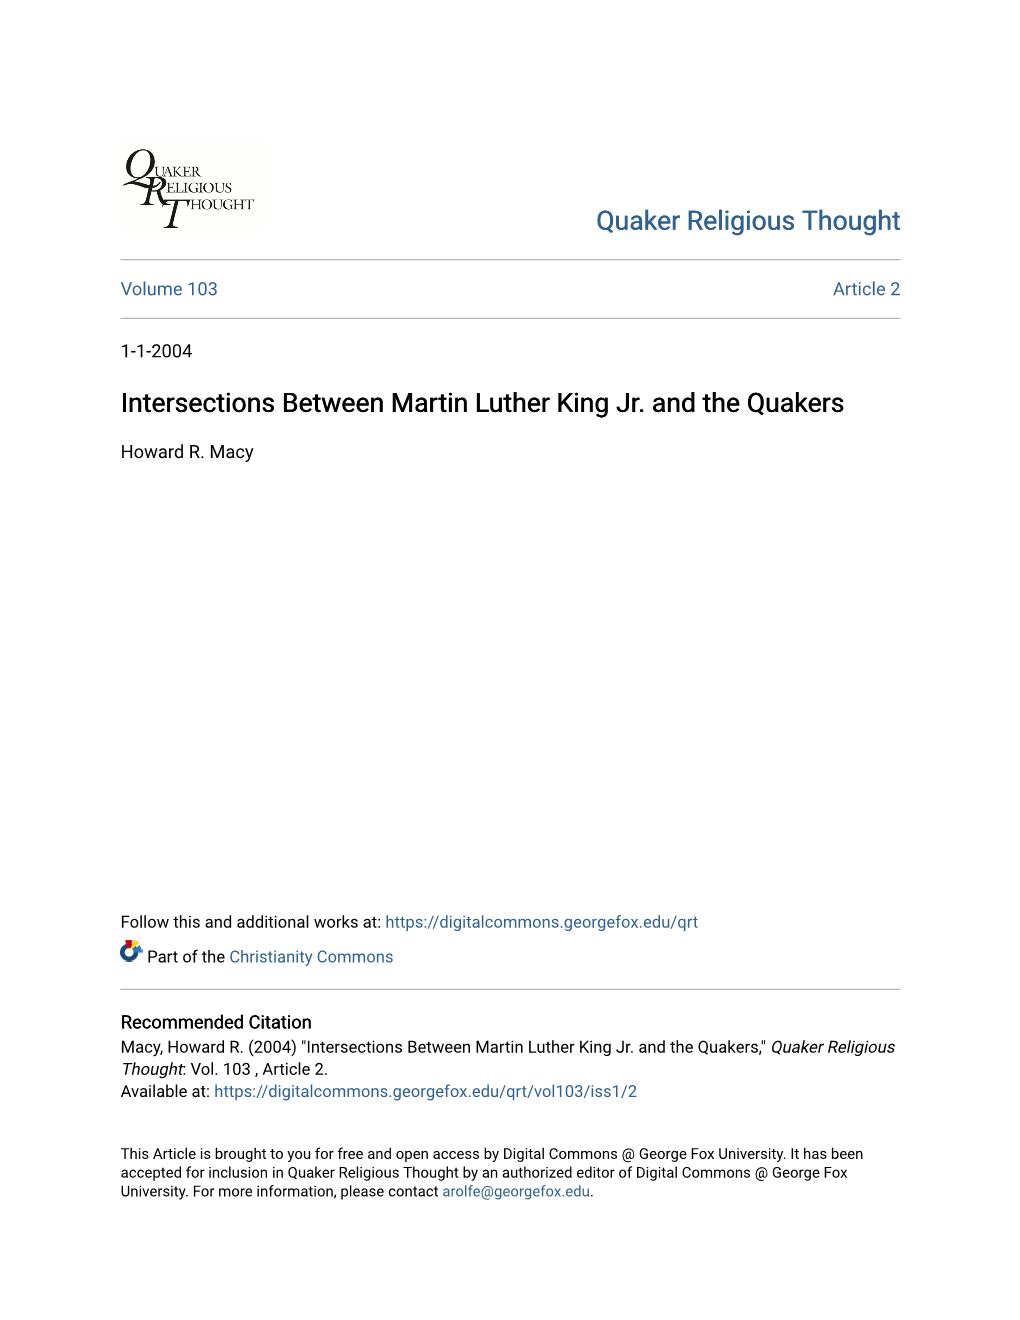 Intersections Between Martin Luther King Jr. and the Quakers